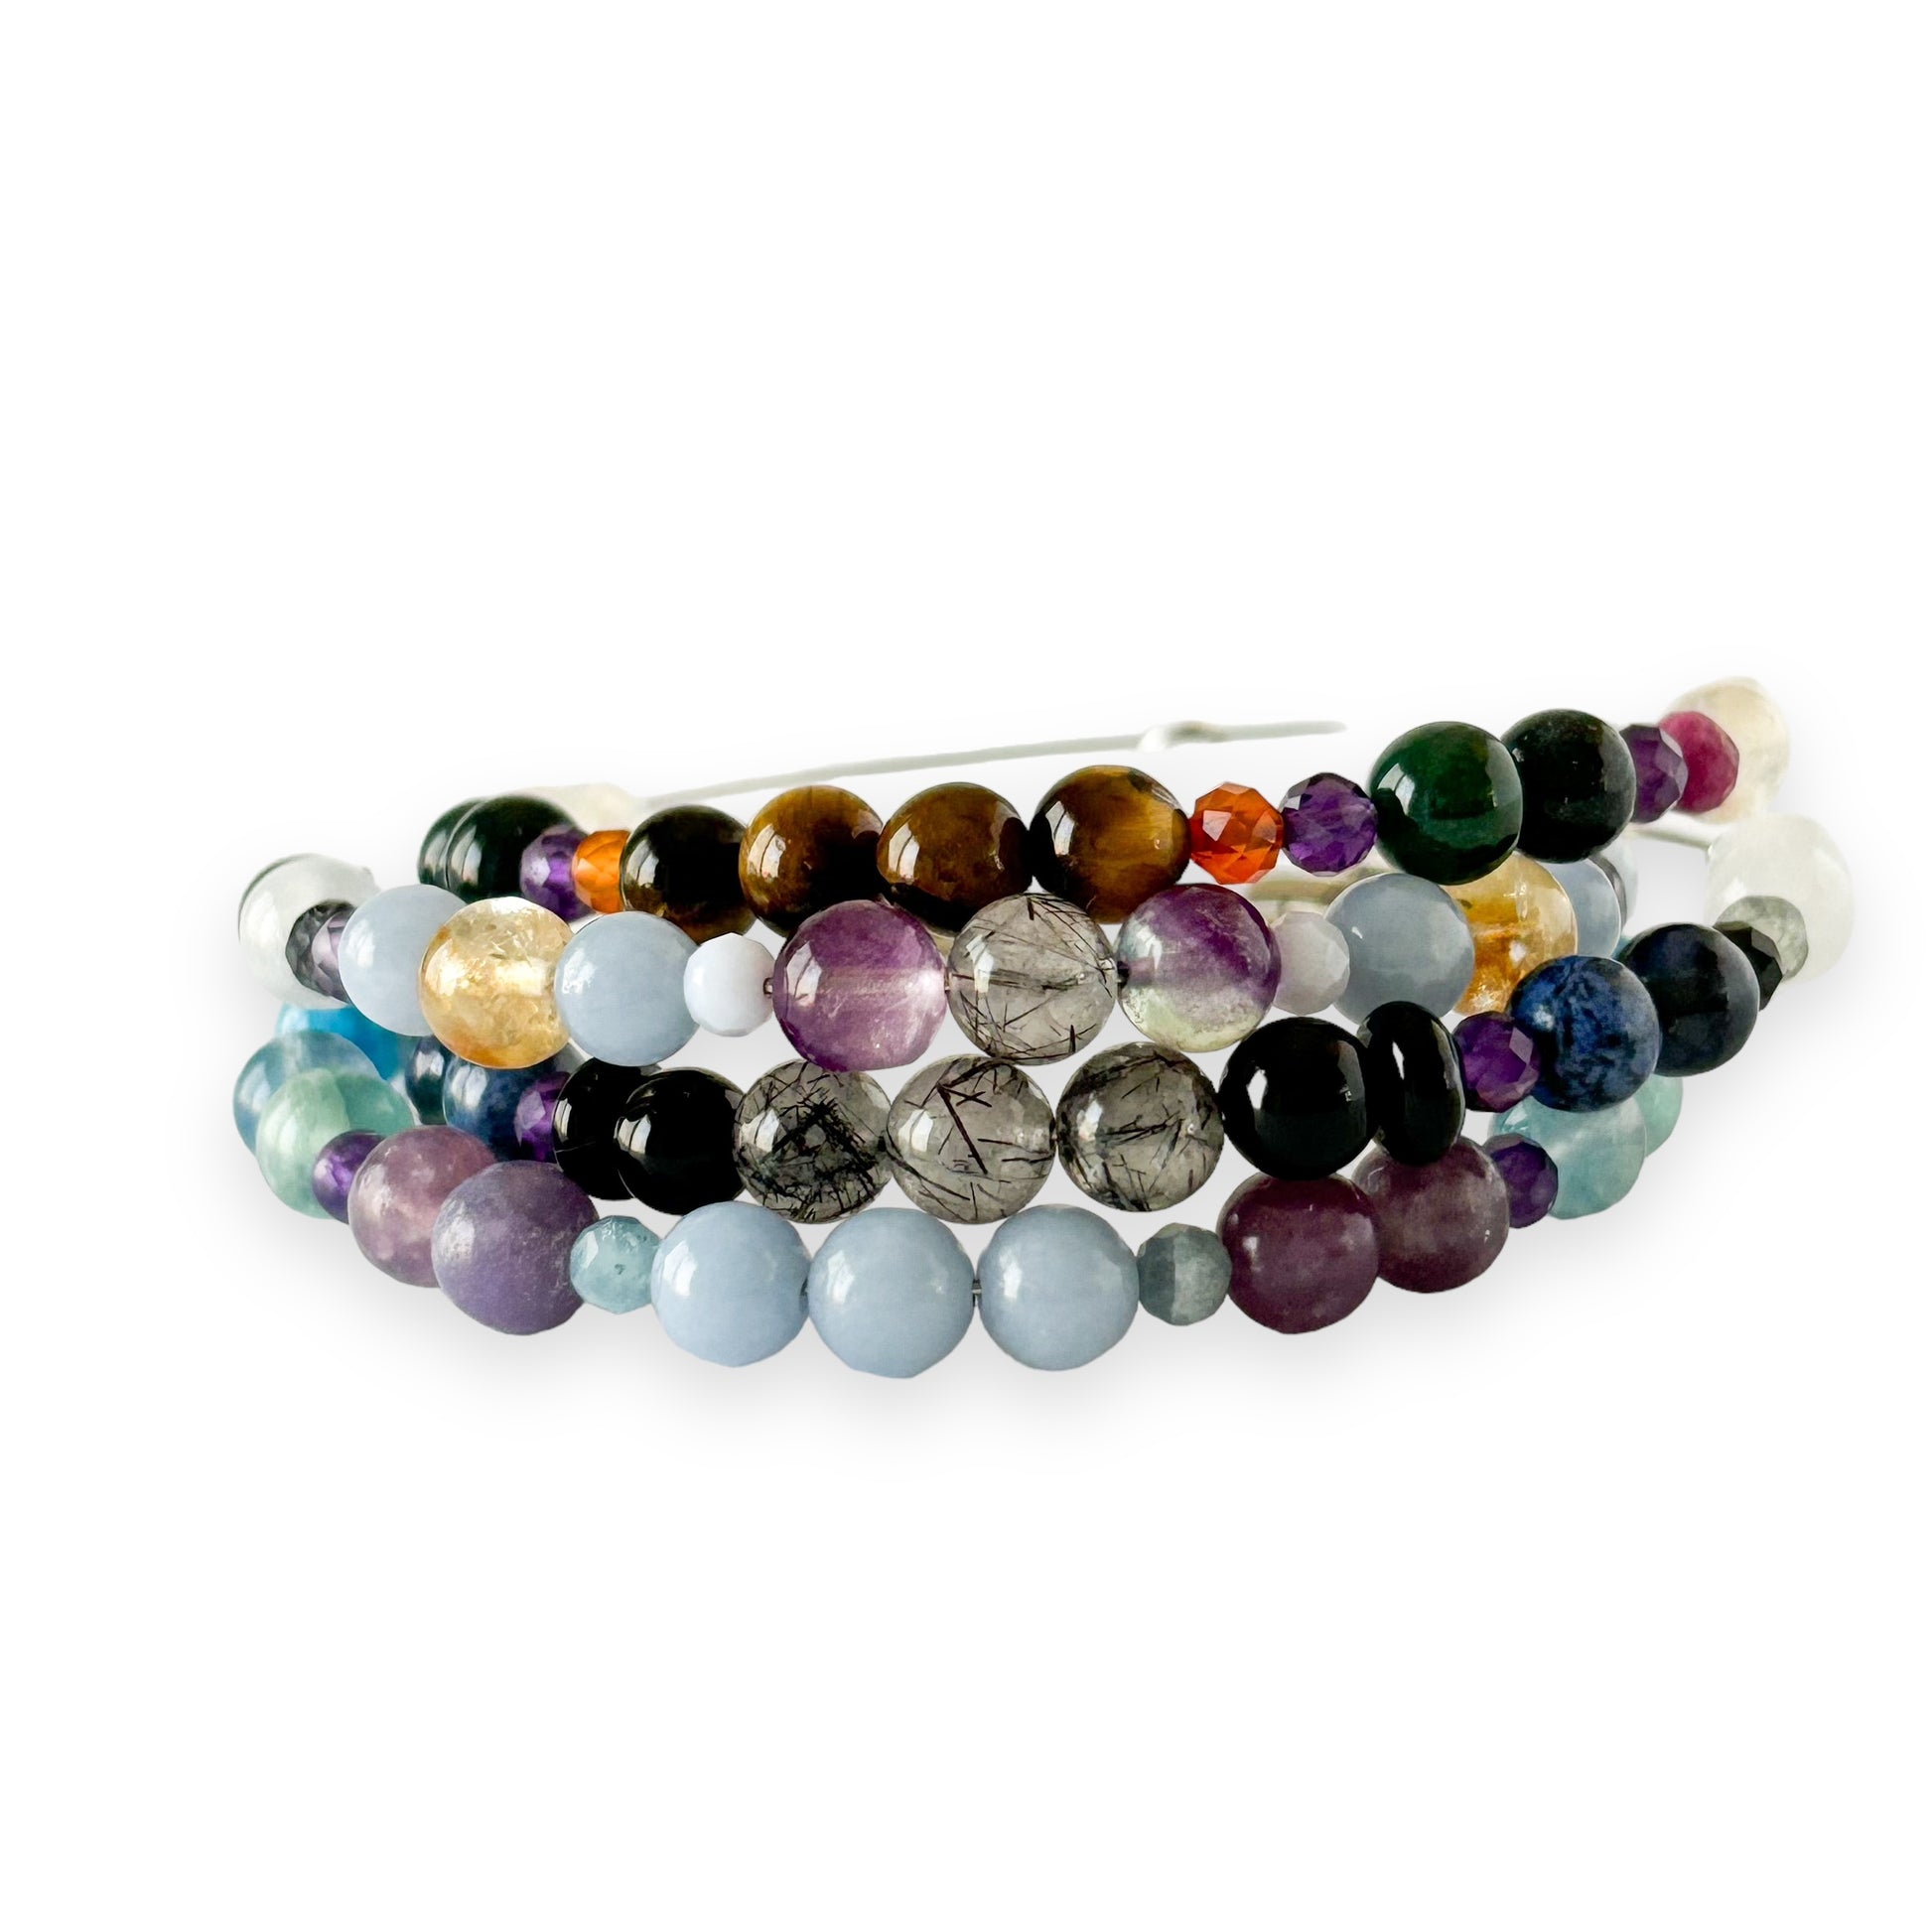 Lepidolite and Amethyst tranquility bangle